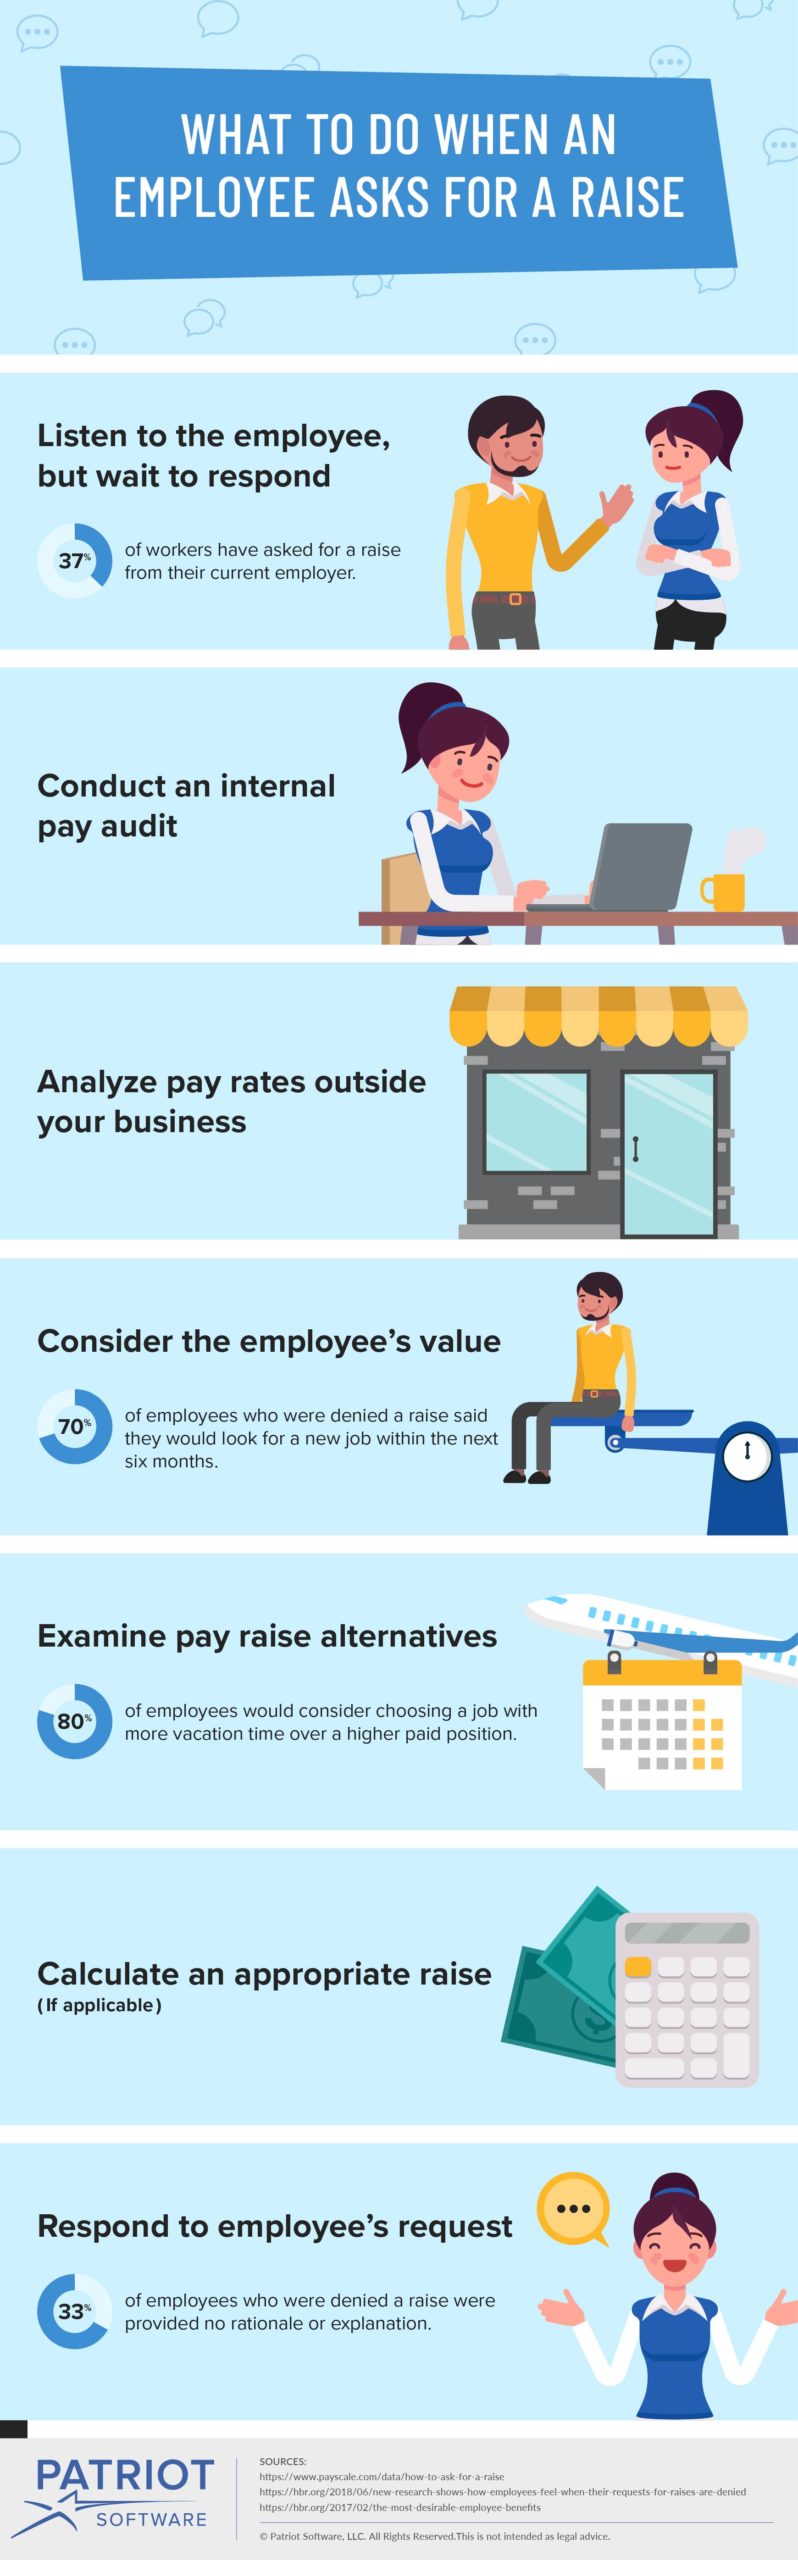 is your employee asking for a raise?